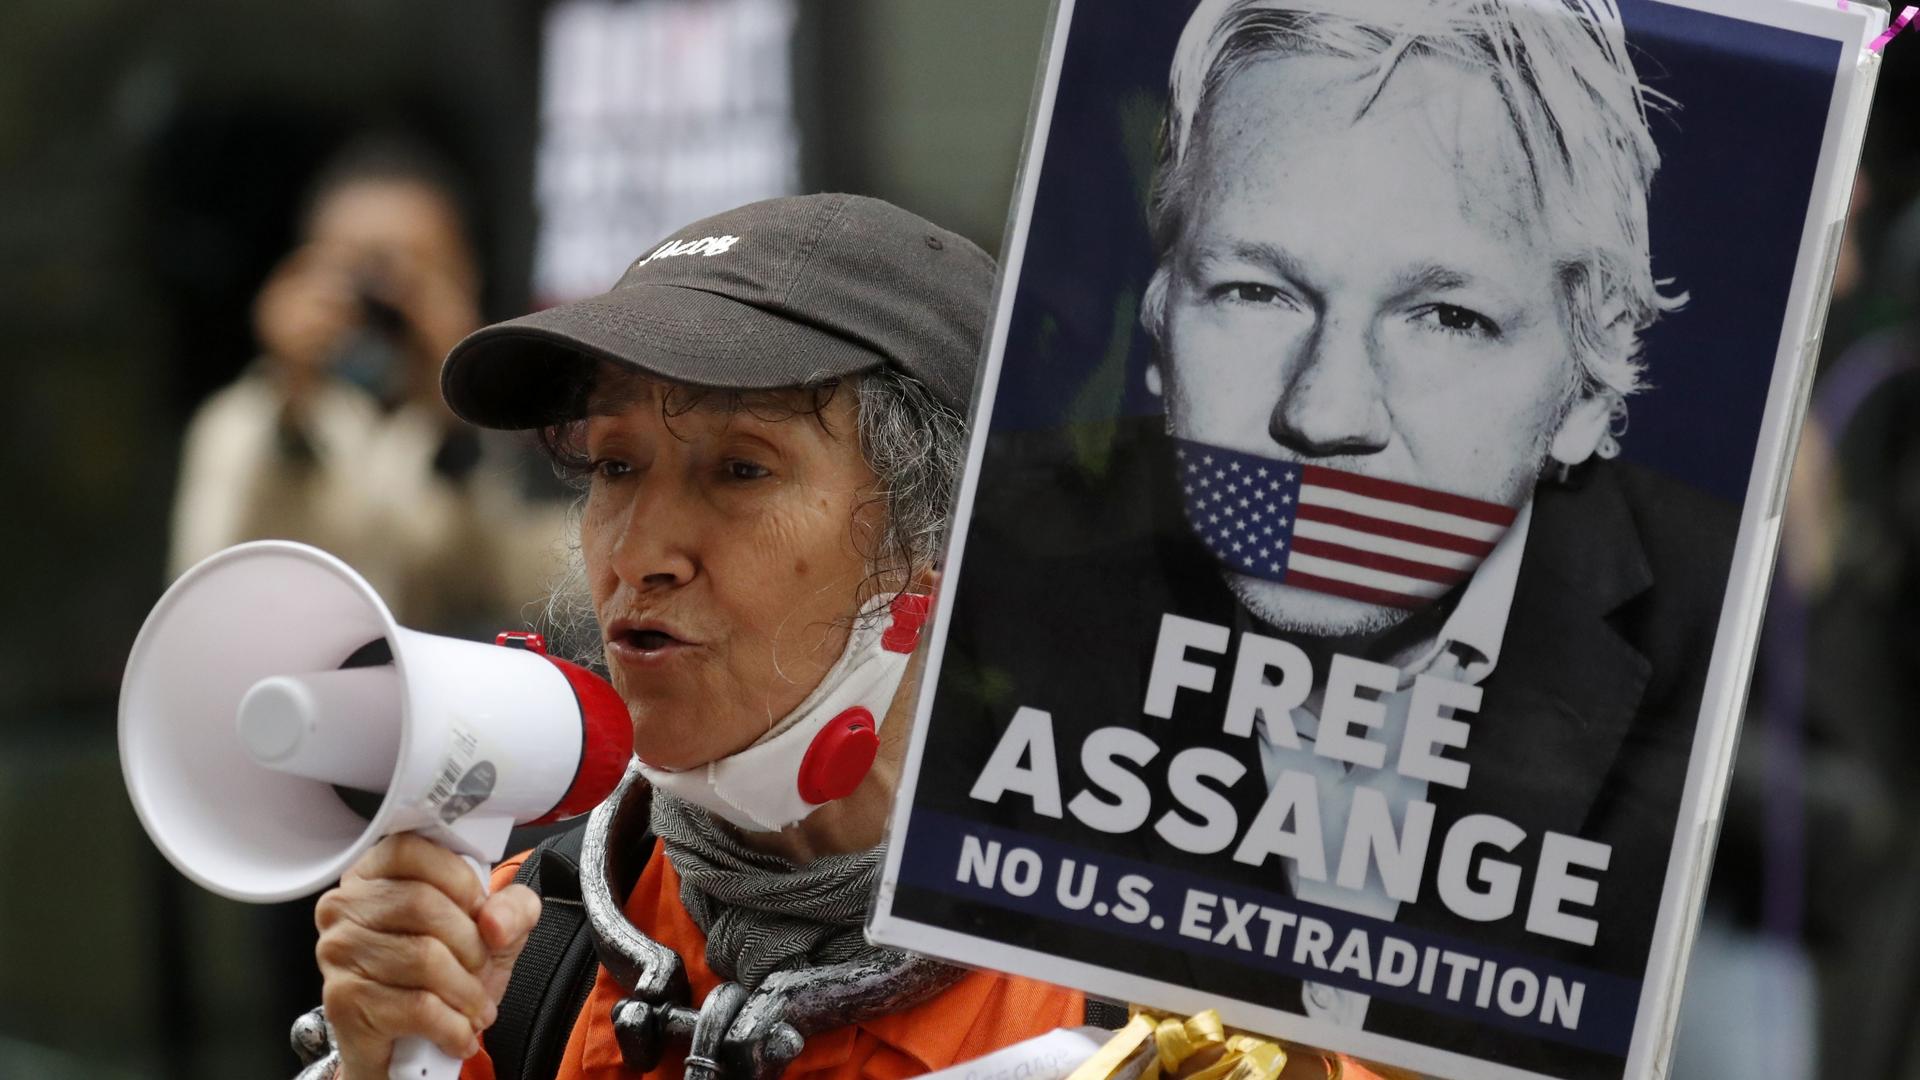 Julian Assange supporters protest outside the Old Bailey in London, United Kingdom, Sept. 7, 2020.